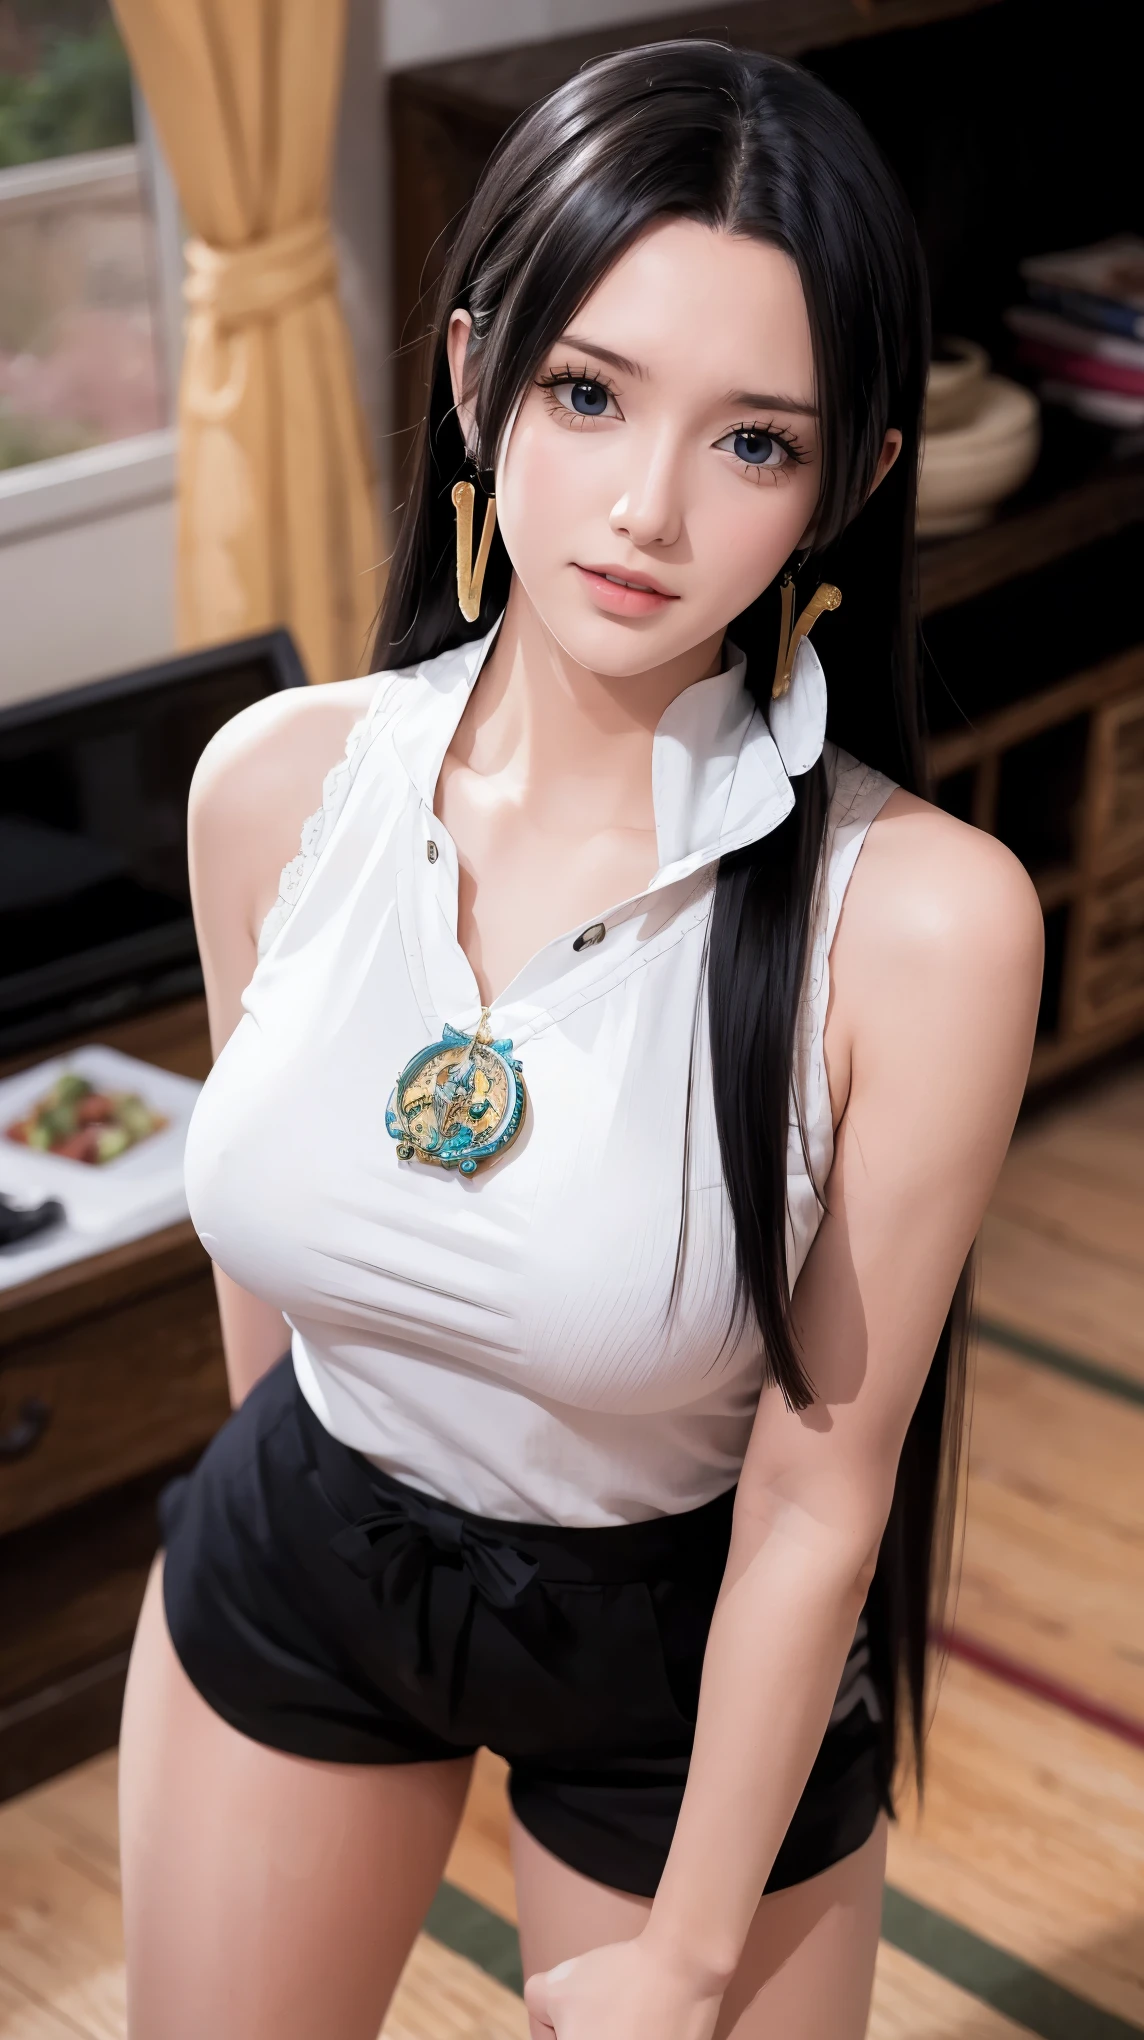 ，Close-up of Miss wearing white mask, Beautiful character painting, Guweiz, Gurwitz-style artwork, White-haired god, author：Yang Jie, Epic and beautiful character art, Stunning character art, author：Fan Qi, by Wuzhun Shifan, pixiv Art Street Guviz, Single ponytail, insult, High Ponytail, Tall and big, Long legs, (sleeveless lace shirt), (shorts), (Striped )), ((Striped )), Walk, elegant, dignified, Miss, Beautiful curves, sweet smile, Strong sense of detail and layering, Farbe丰富绚丽, Has a unique texture, rich and Farbeful, Farbe, vivid, Design Art, 16K, Super detailed, {{illustration}}, {Extremely refined}, {Exquisite surface treatment}, Super detailed, Delicate and shining eyes, {{Light}}, Ultimate light effect, model: Realism, CFG size: 12, Laura: Bright texture (1.35), high quality, masterpiece, Exquisite facial features, Delicate hair depiction, Detailed depiction of the eyes, masterpiece, best quality, Light line tracing, Extremely detailed CG unified 8k wallpaper, masterpiece, best quality, (1 girl), 完美Miss身材, (((tight white t shirt))),  (Delicate face), short black hair, Tie your hair up, Light blue hairpin,  (White skin), (Optimal Lighting), (Super intricate details), 4k unity, (Super detailed CG), Showing off her white legs, , Hot Pants, shorts,